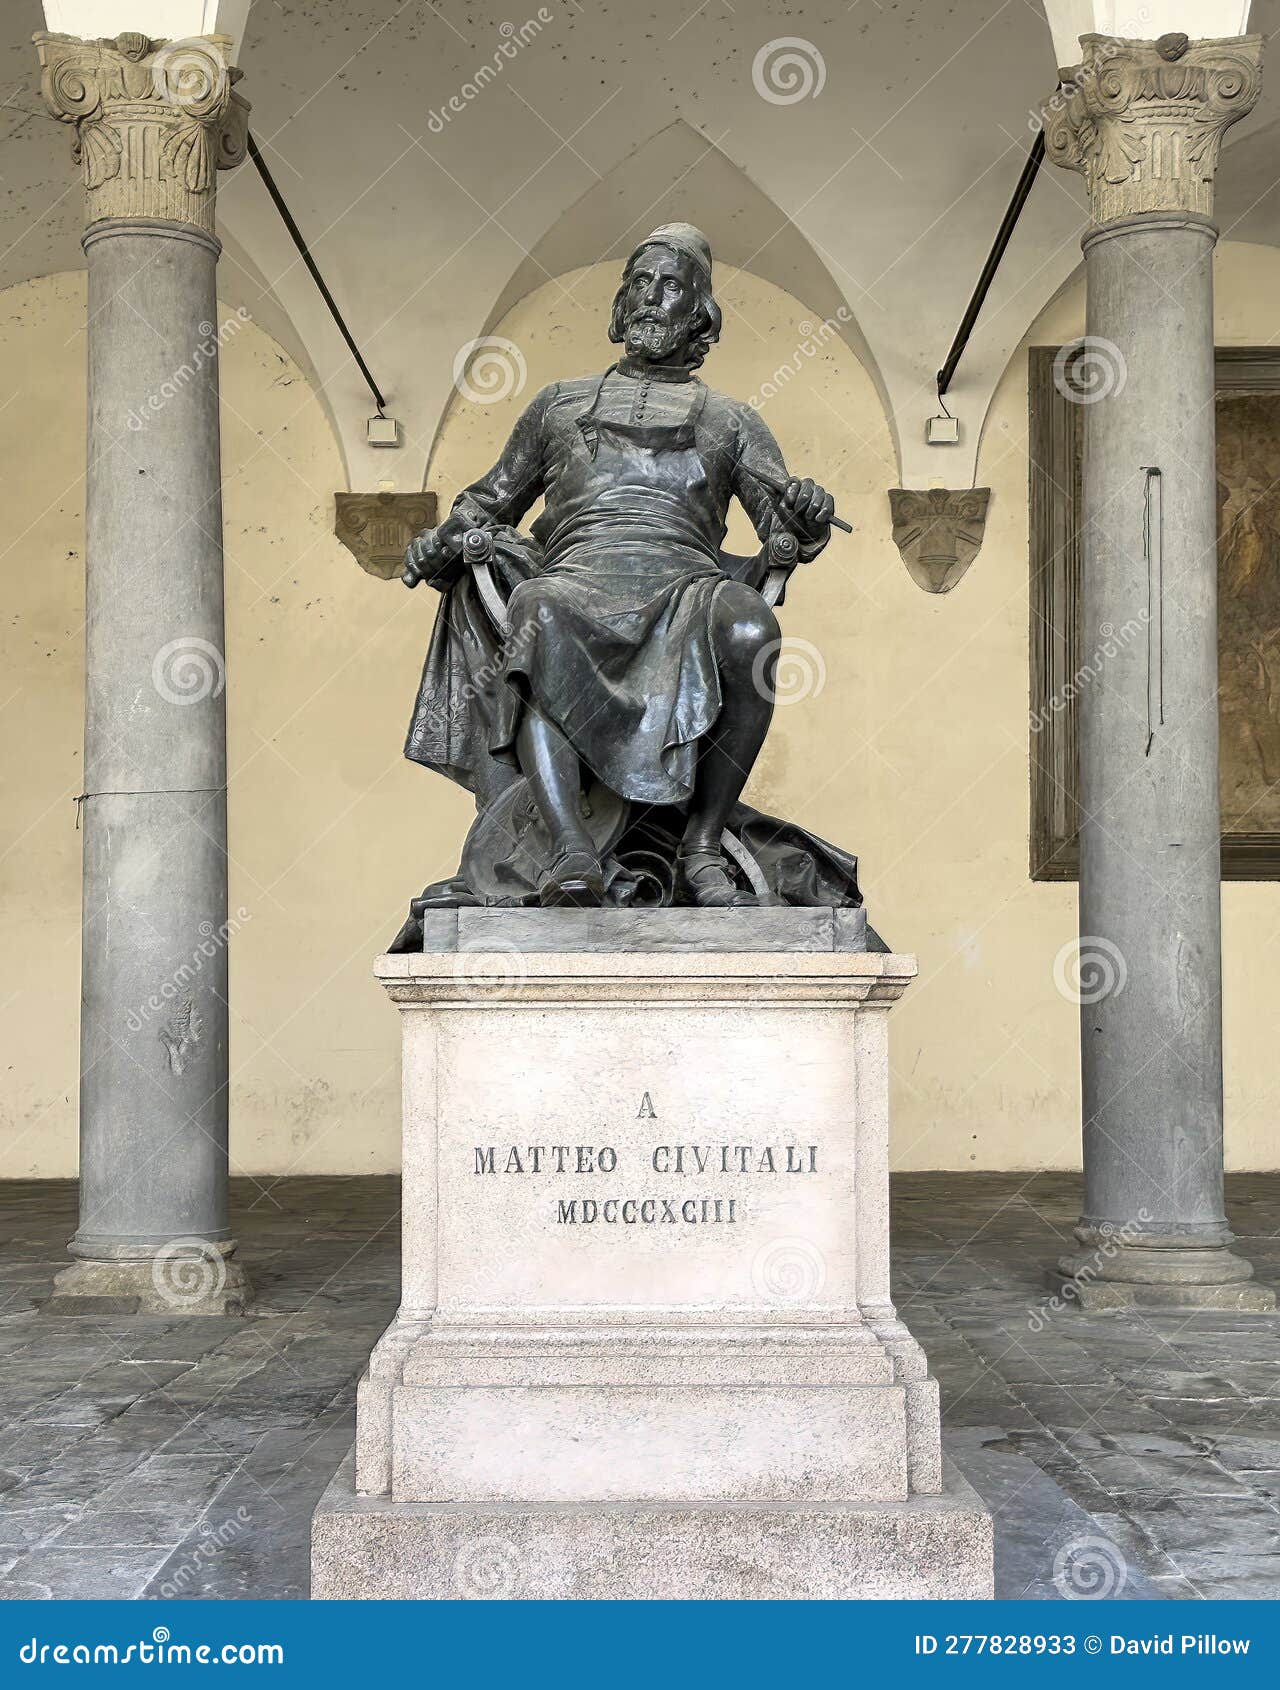 monument to matteo civitali by arnaldo fazzi in the loggia of the praetorian palace in lucca, italy.